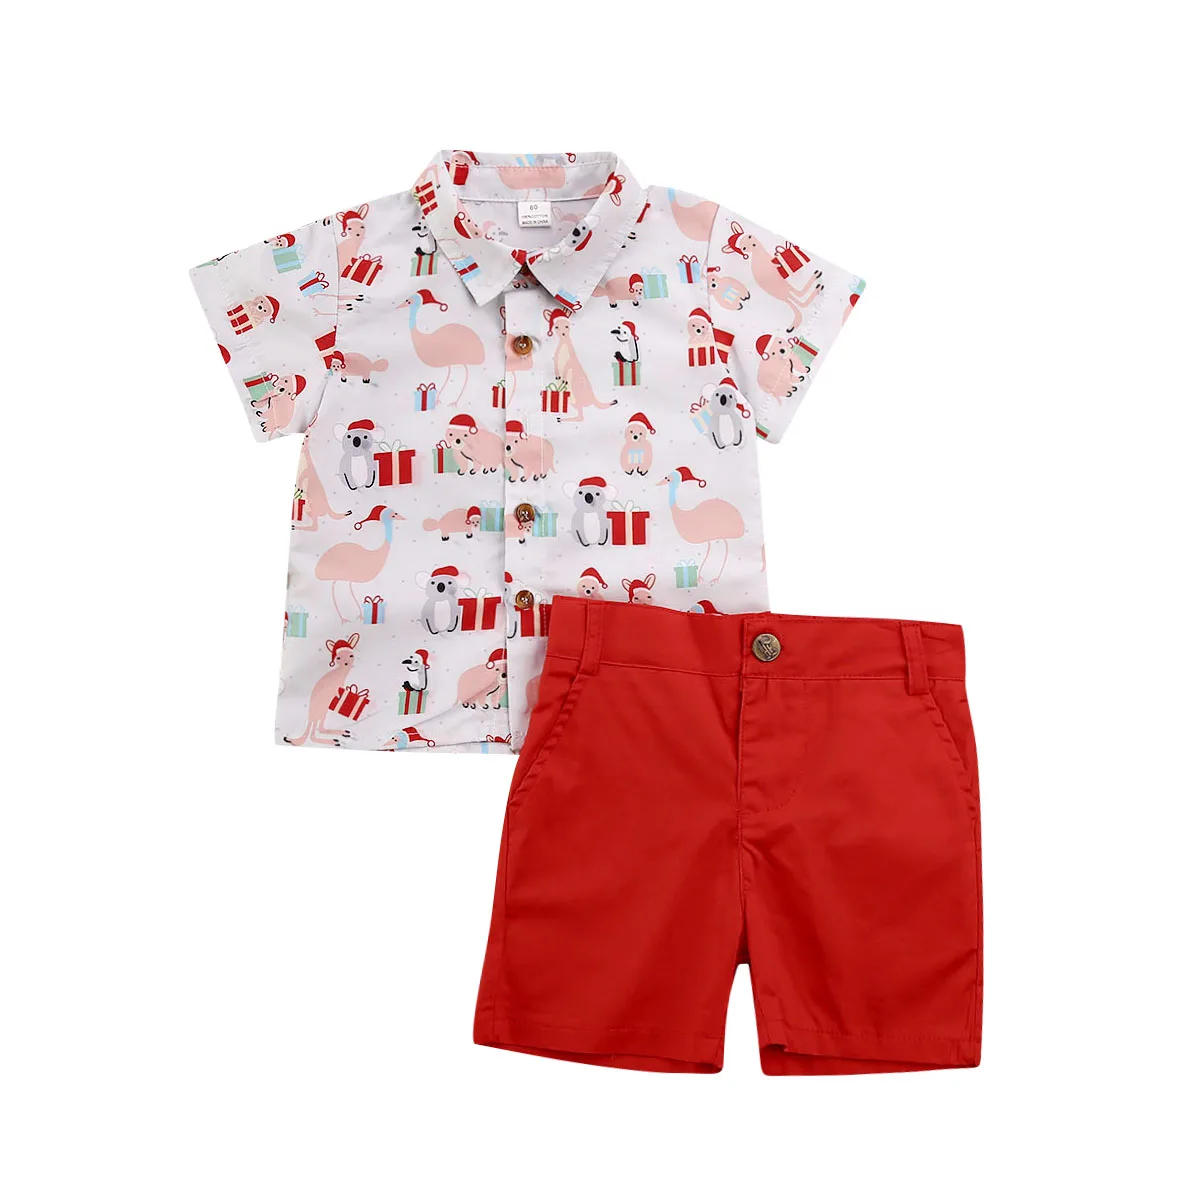 New Christmas Kids Toddler Boys Gentleman Tops Shorts Clothes Outfits 2-6Y